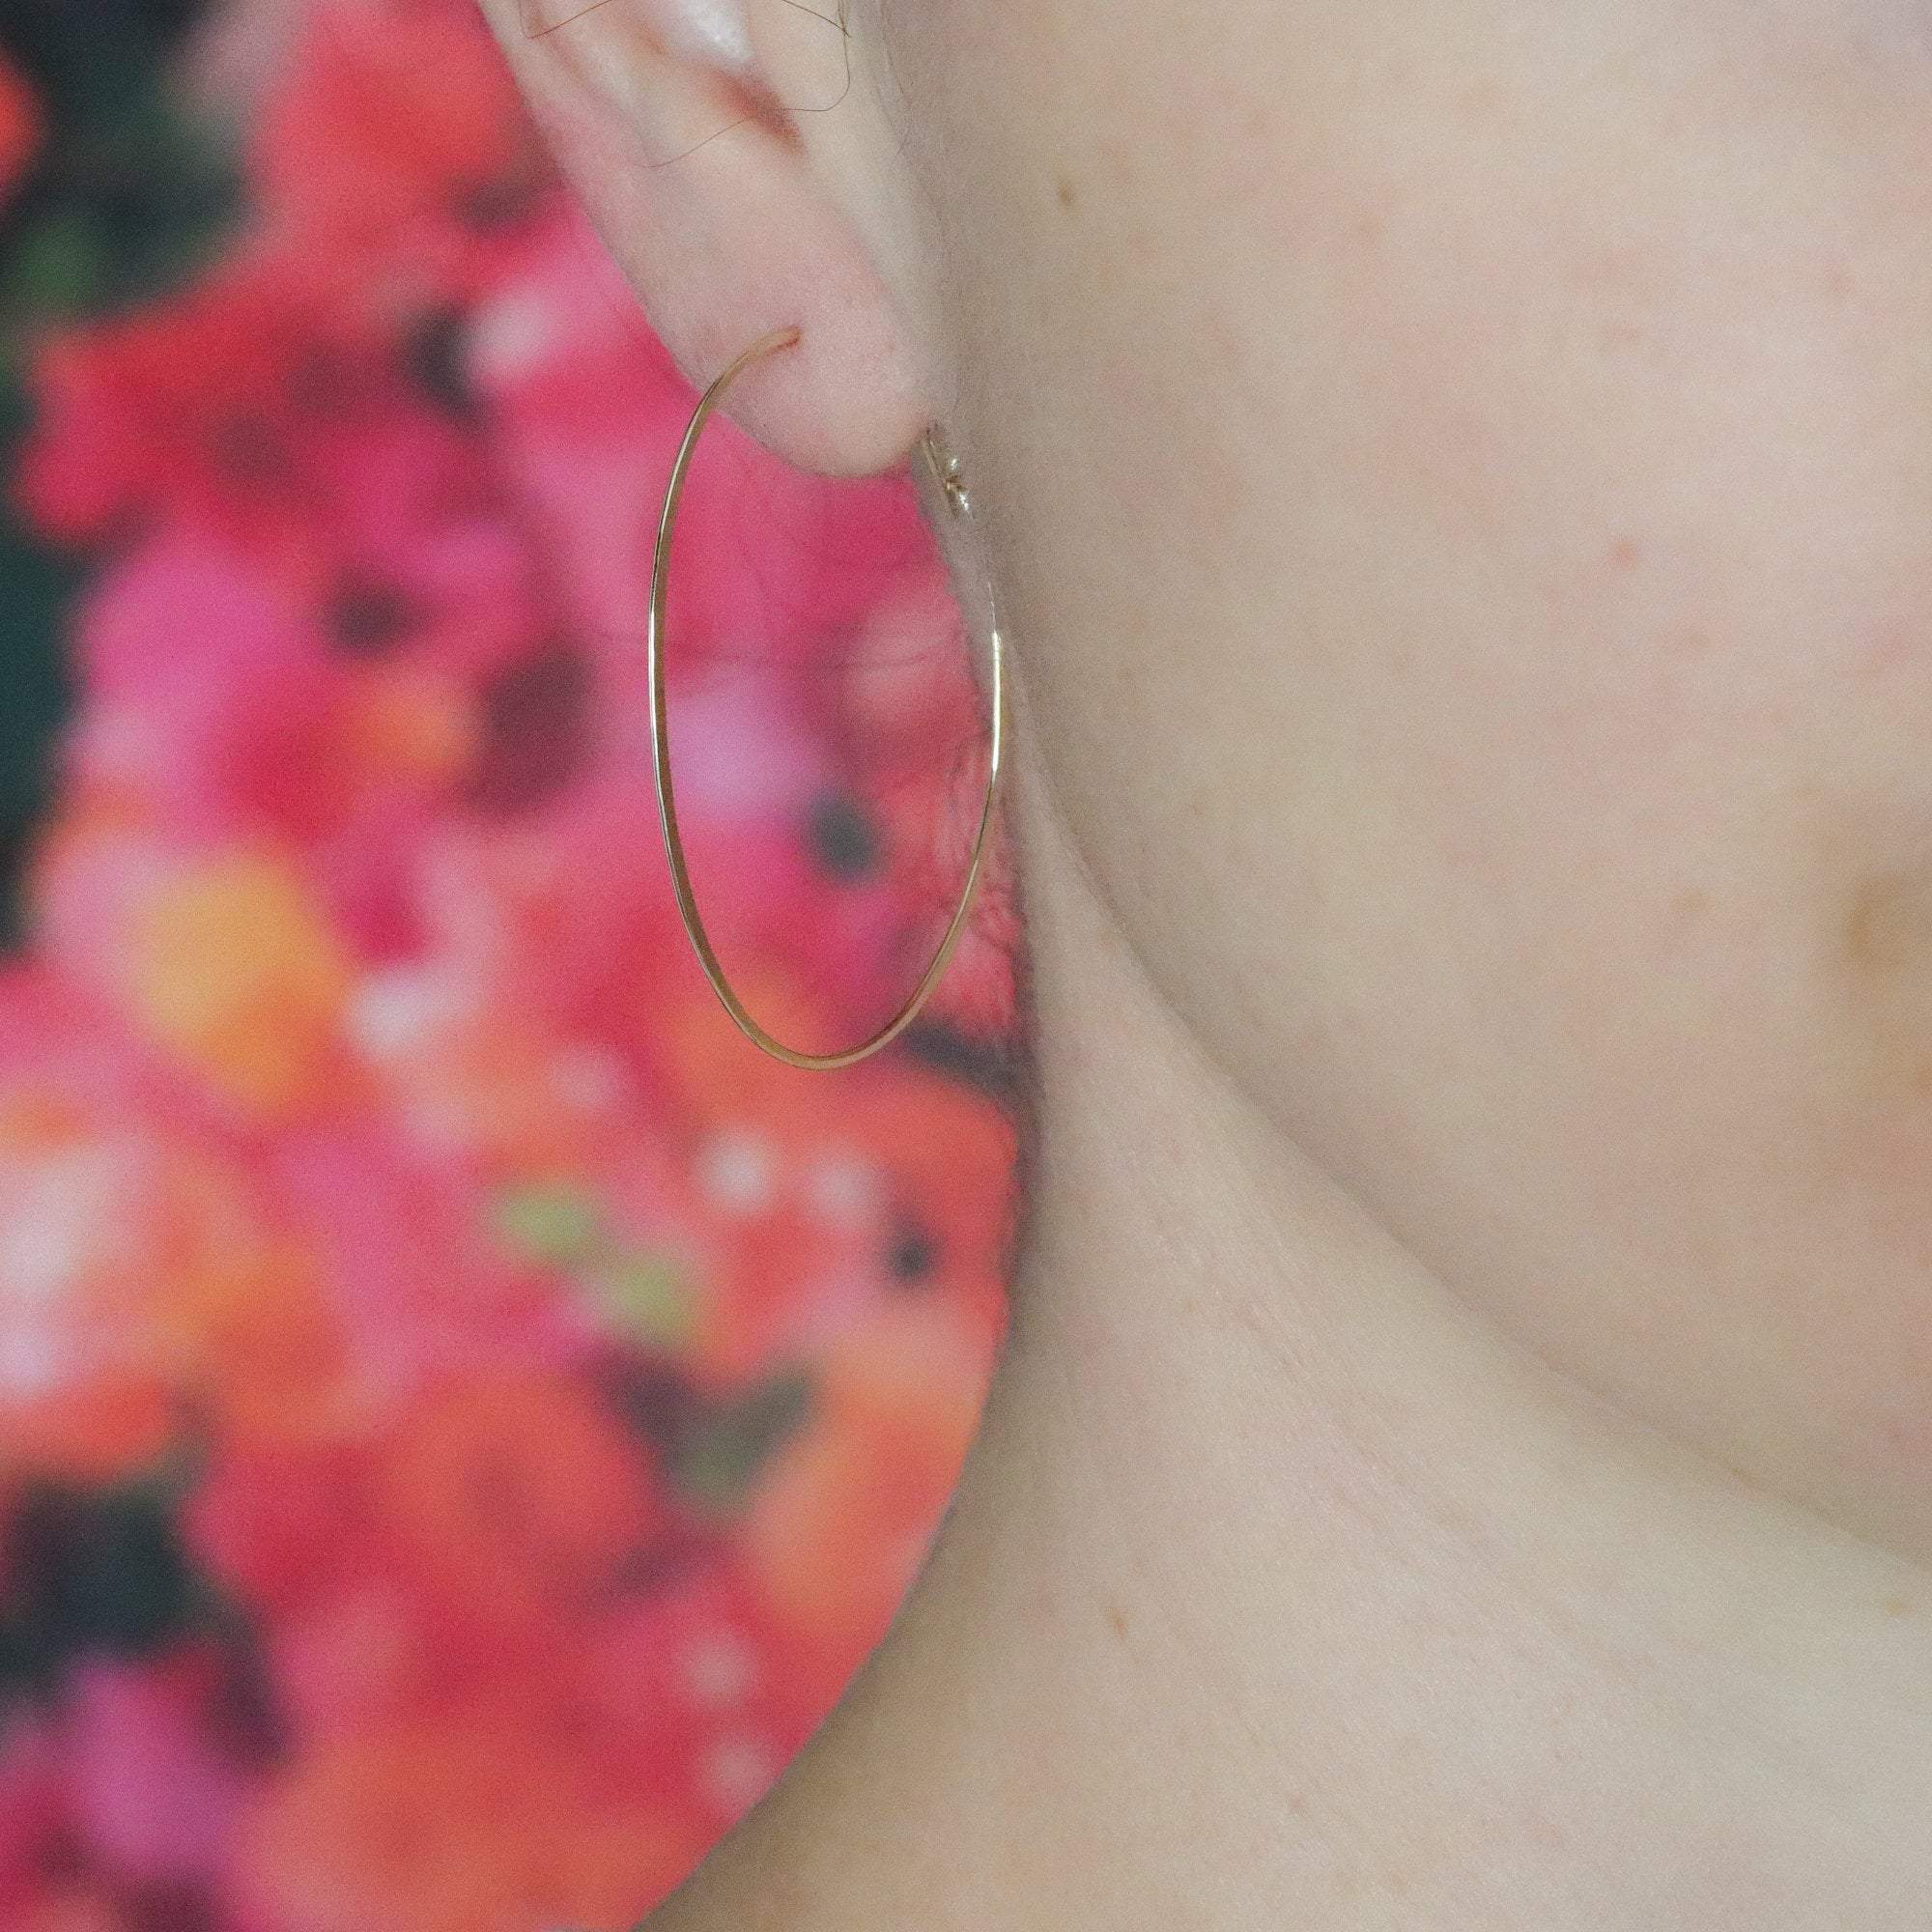 Large Oval Hoops